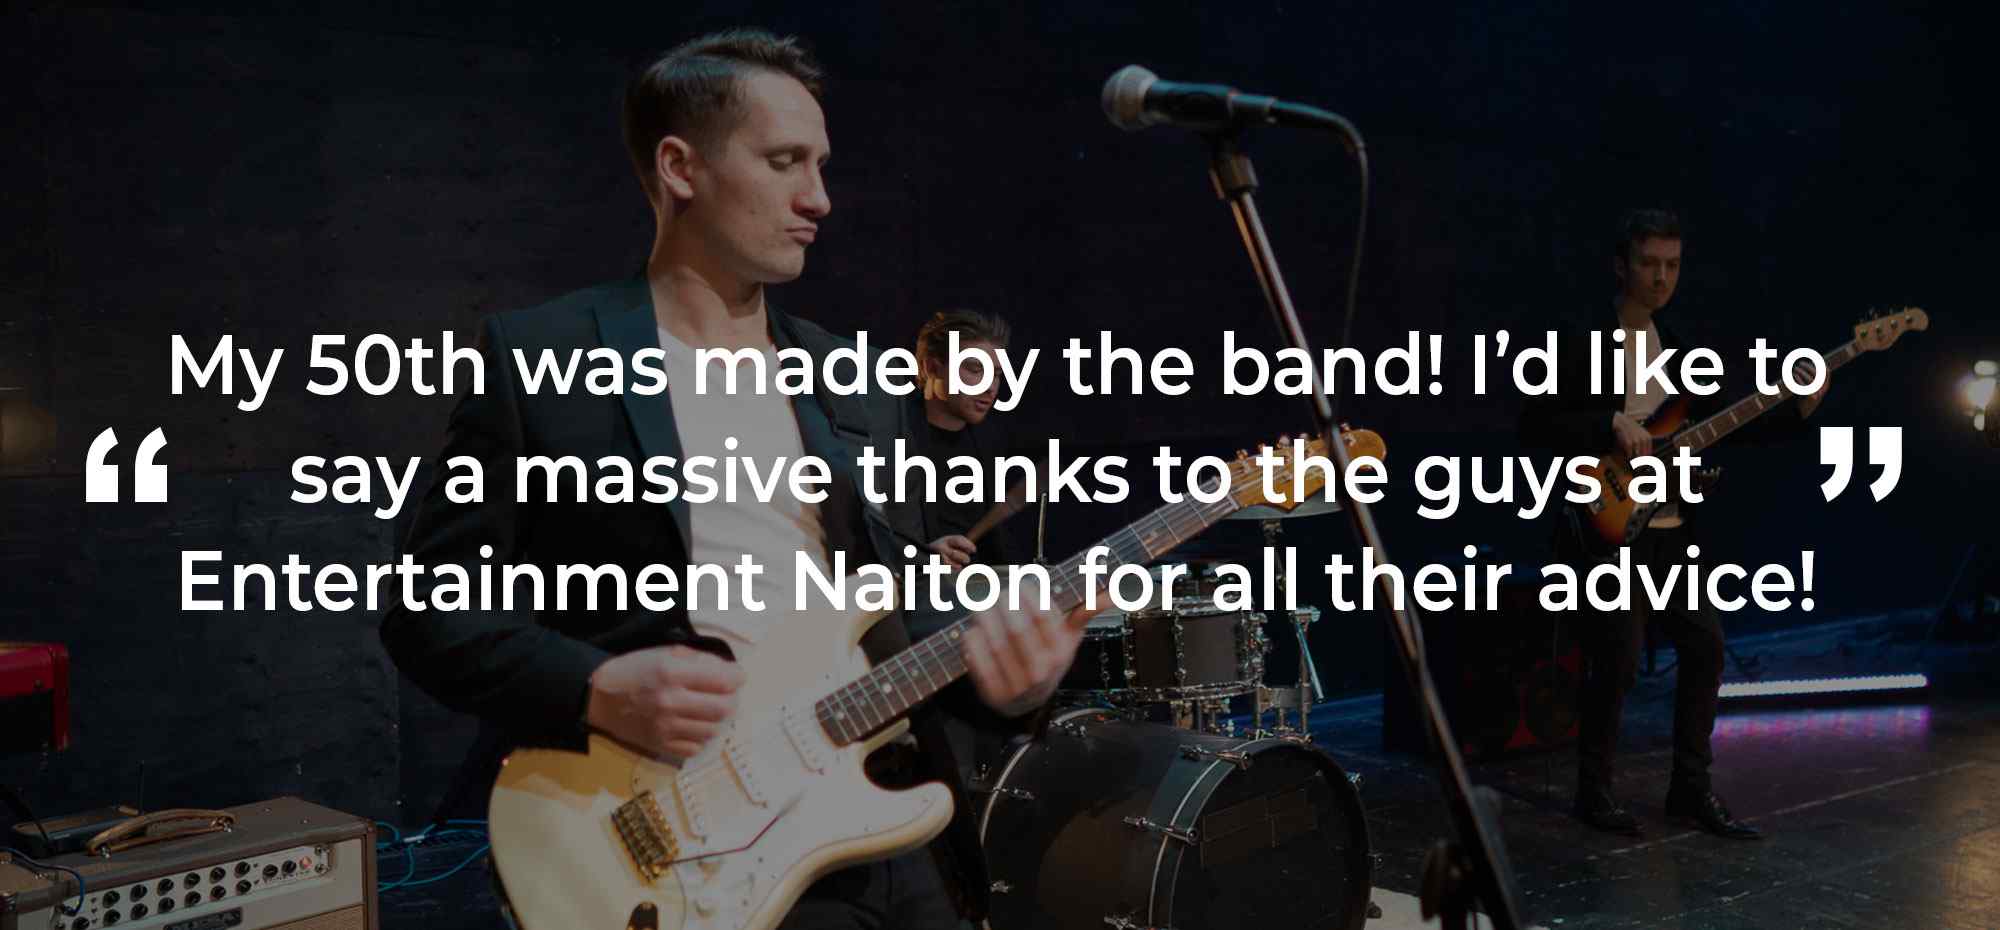 Client Review of a Party Band Oxfordshire